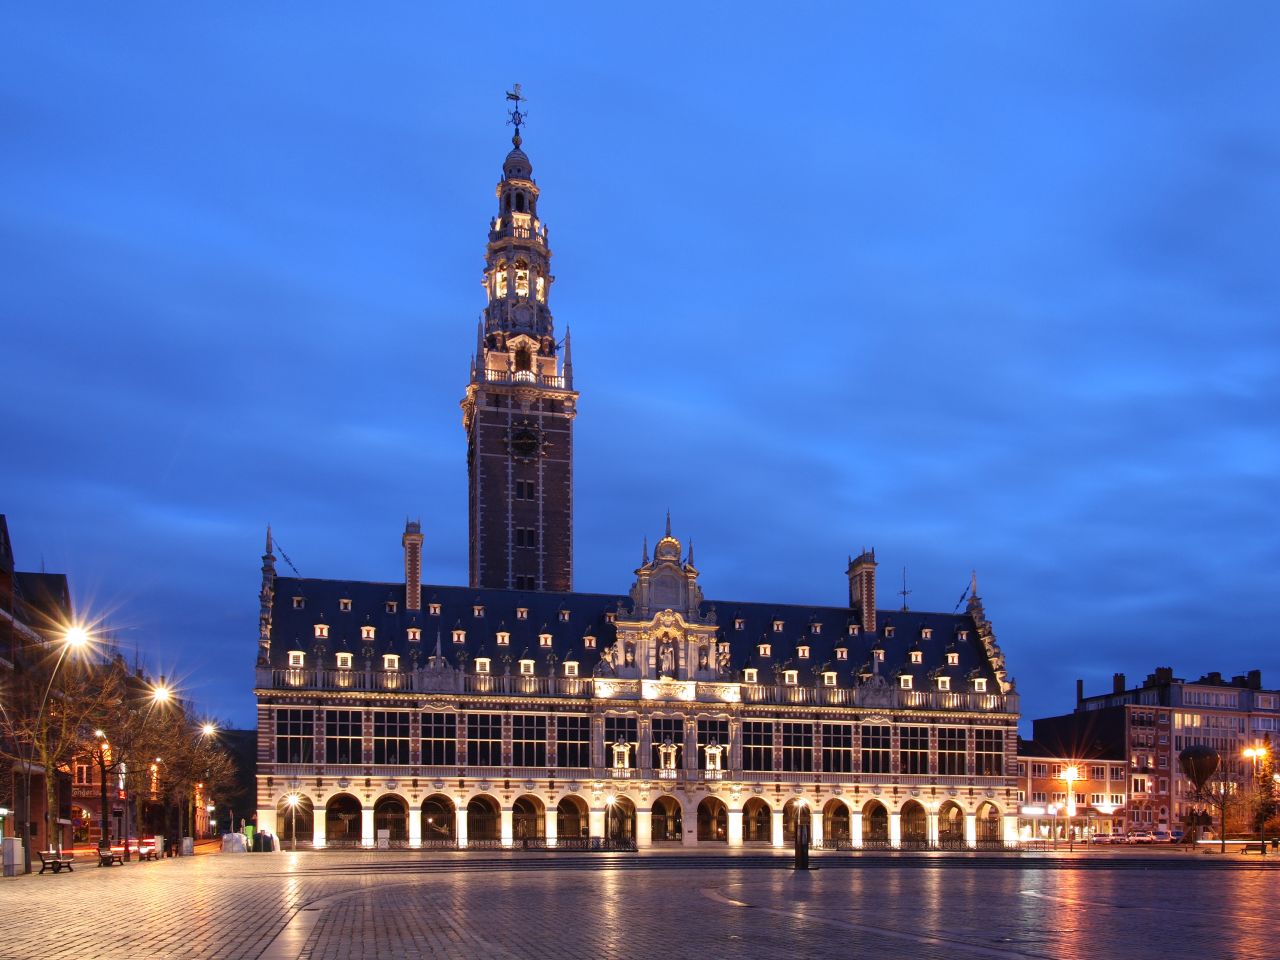 At Katholieke Universiteit Leuven, this building is designed in a neo-Flemish Renaissance style. During World War II the building and its 900,000 books were destroyed. It was rebuilt according to the original design of architect Whitney Warren. <strong>Architects:</strong> Warren & Wetmore. 